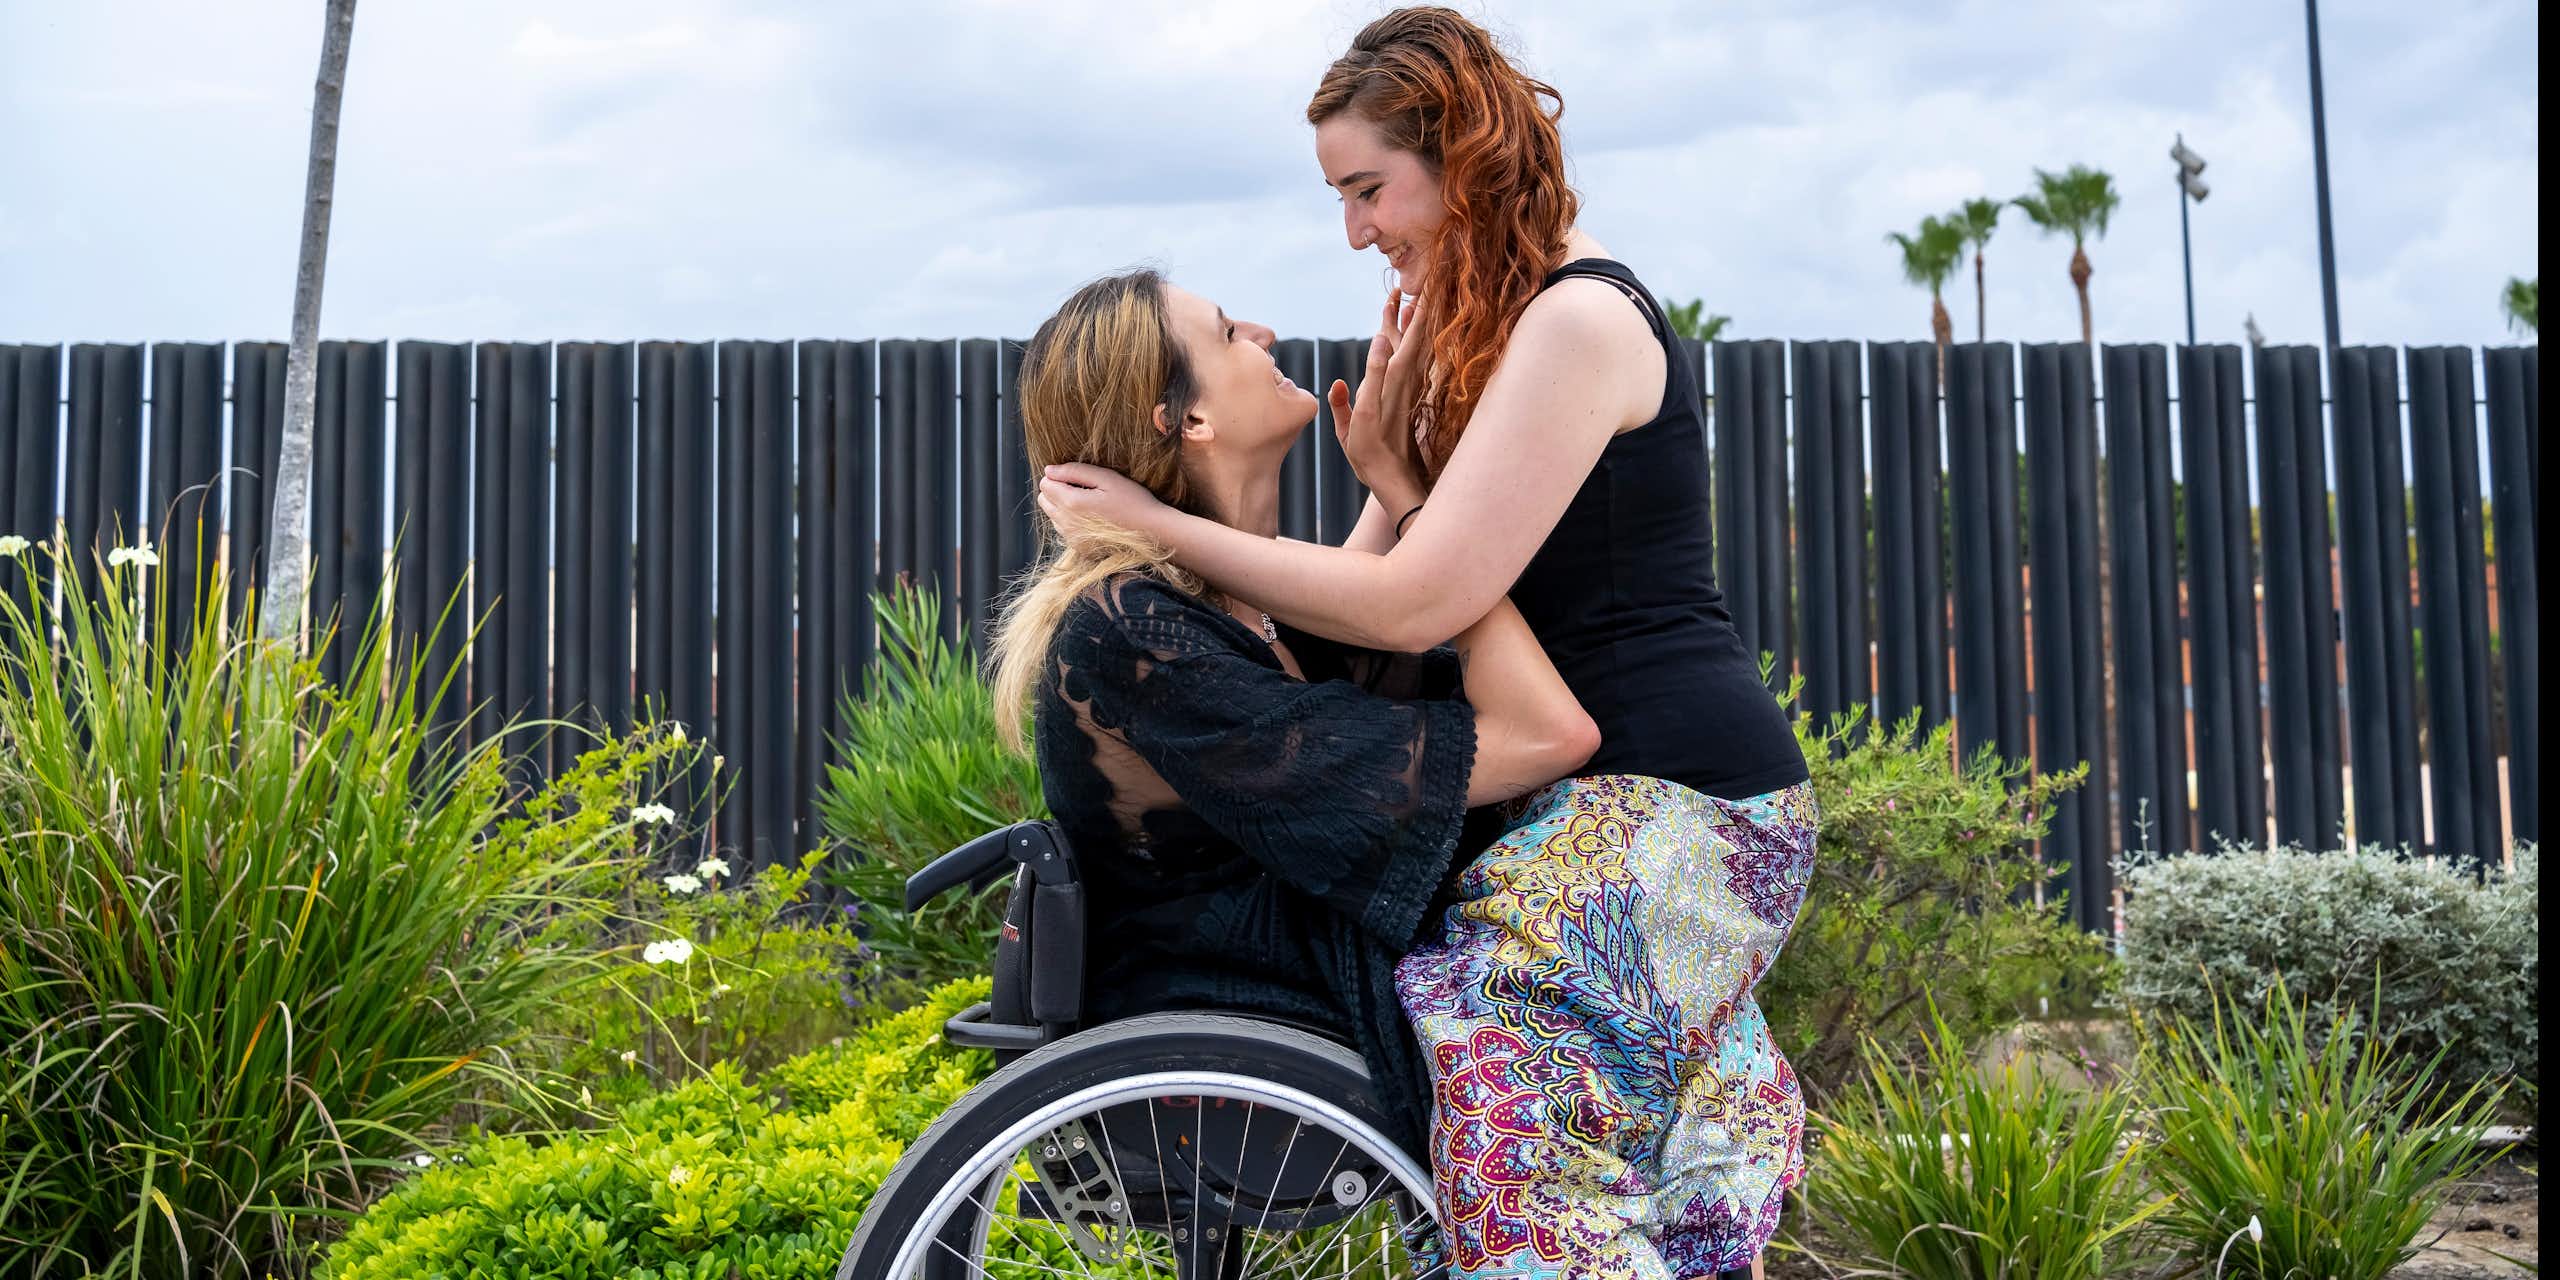 A woman sits on the lap of a woman in a wheelchair. They are smiling and looking lovingly into each other's eyes.